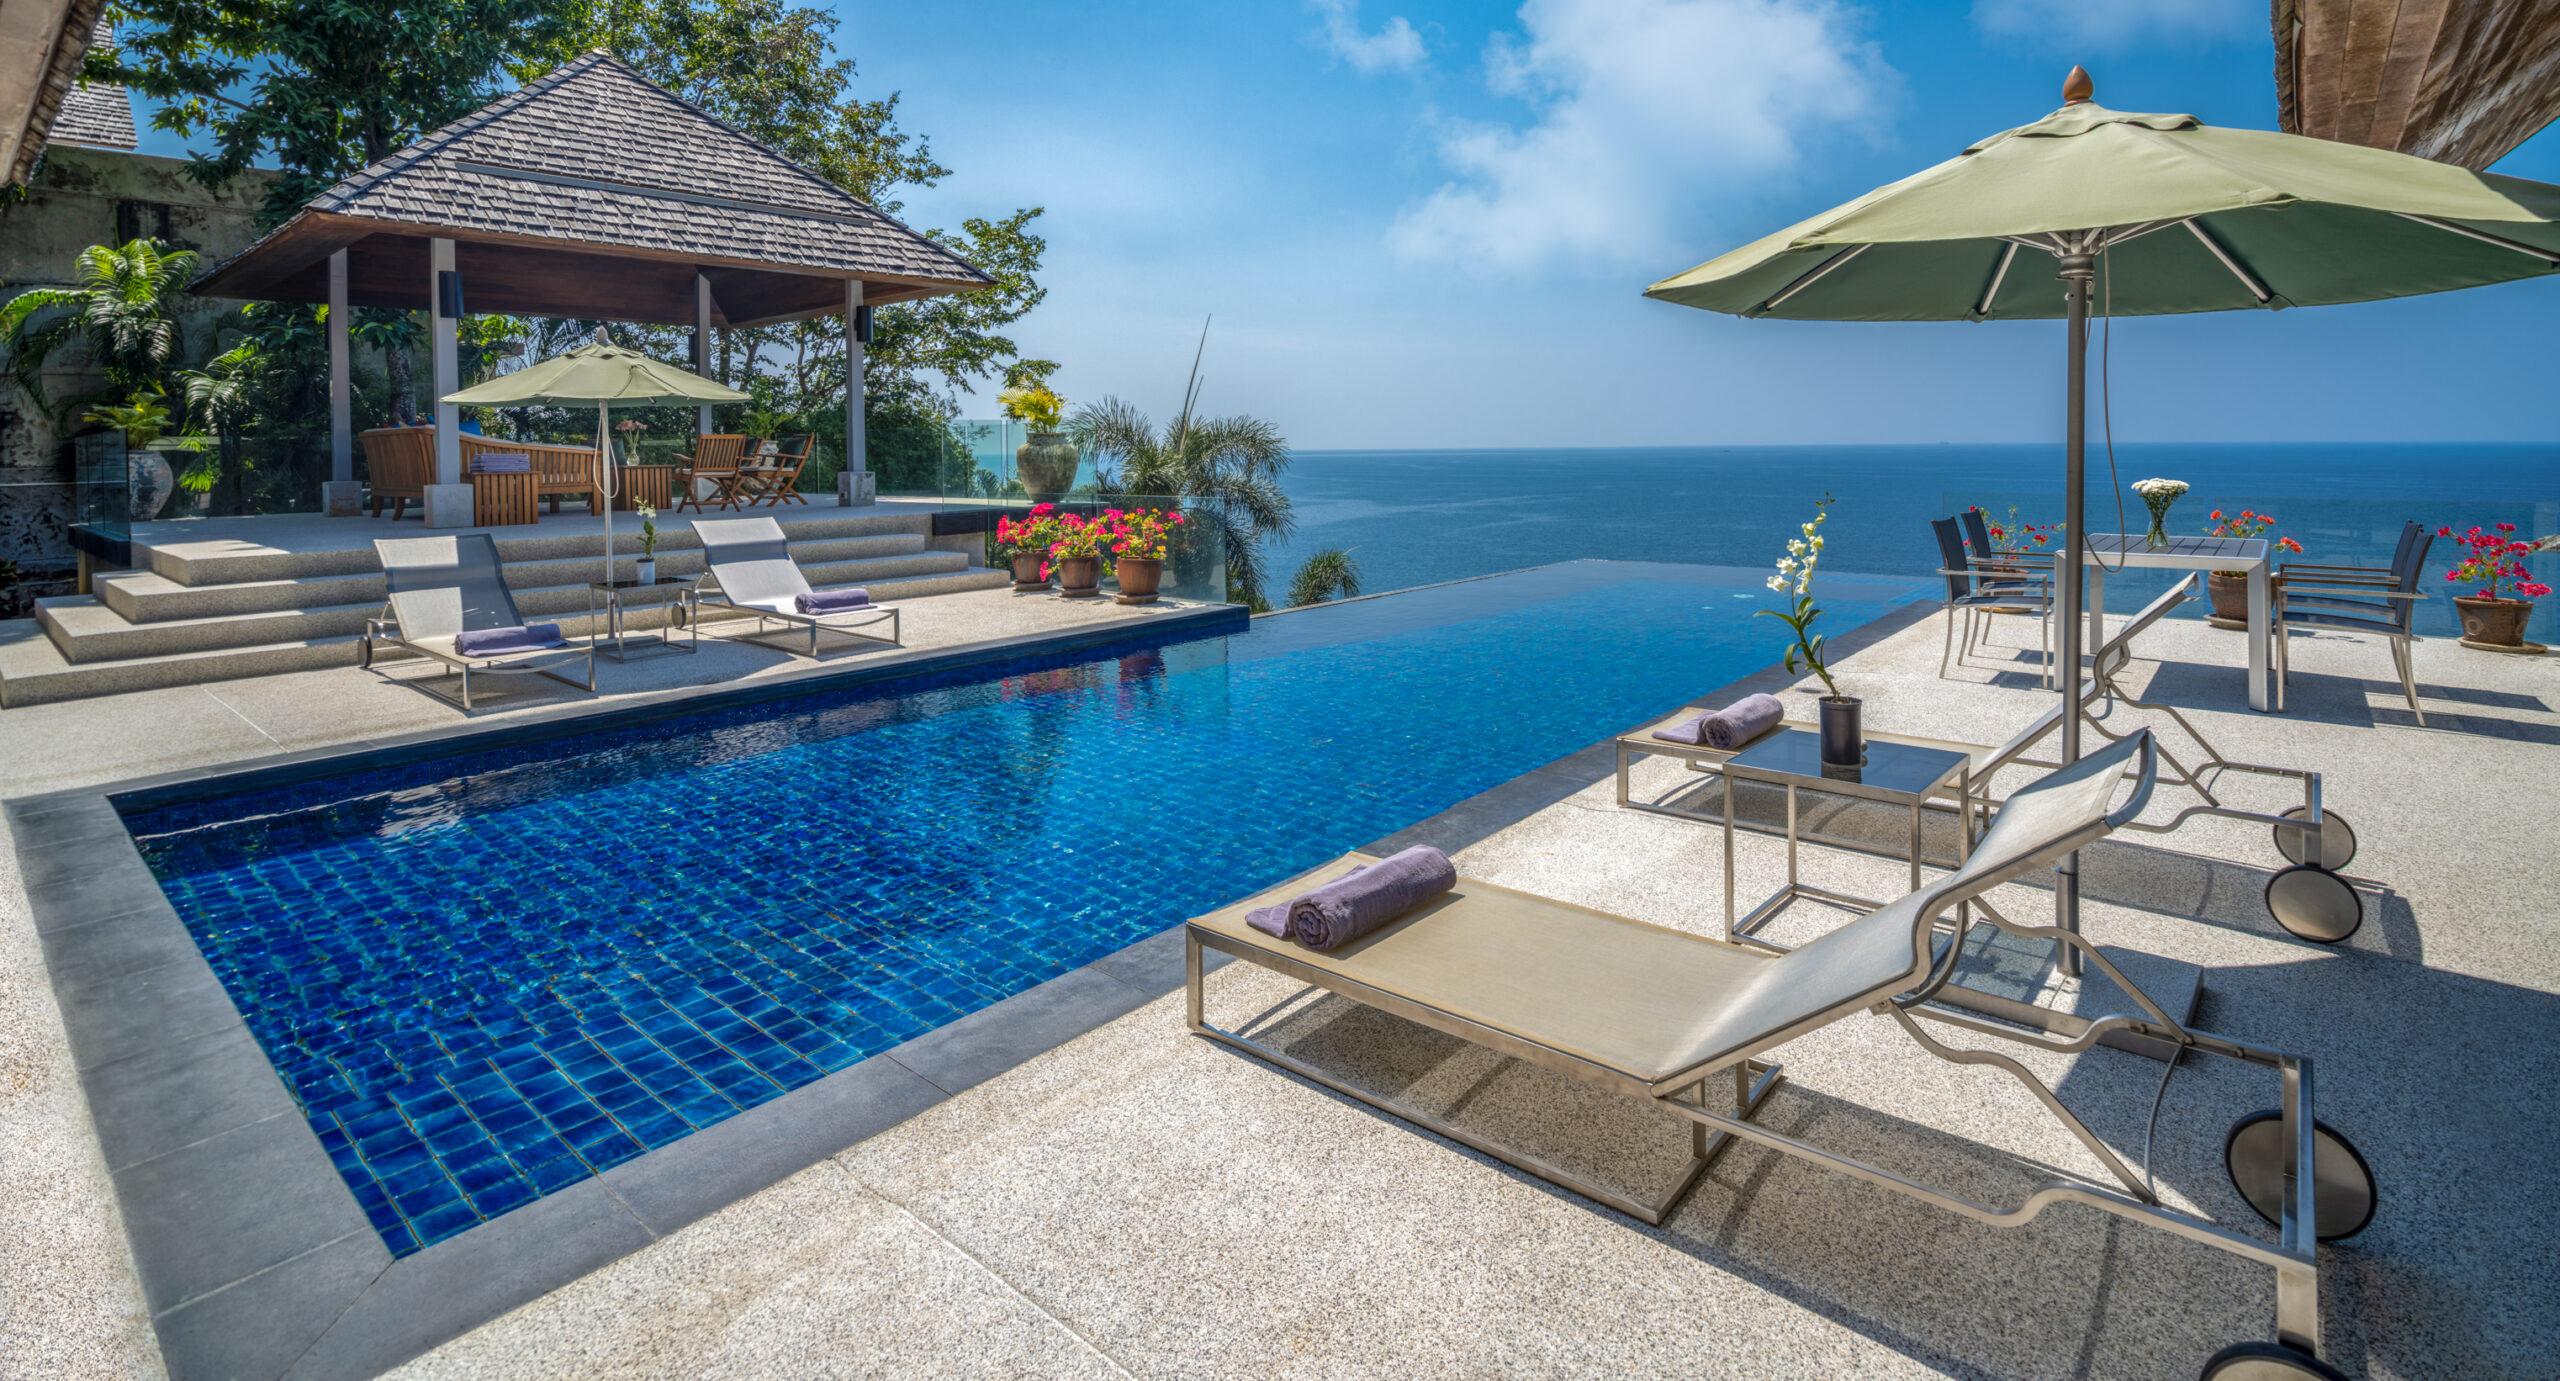 5 bedroom luxury villa for sale perched above Kamala beach